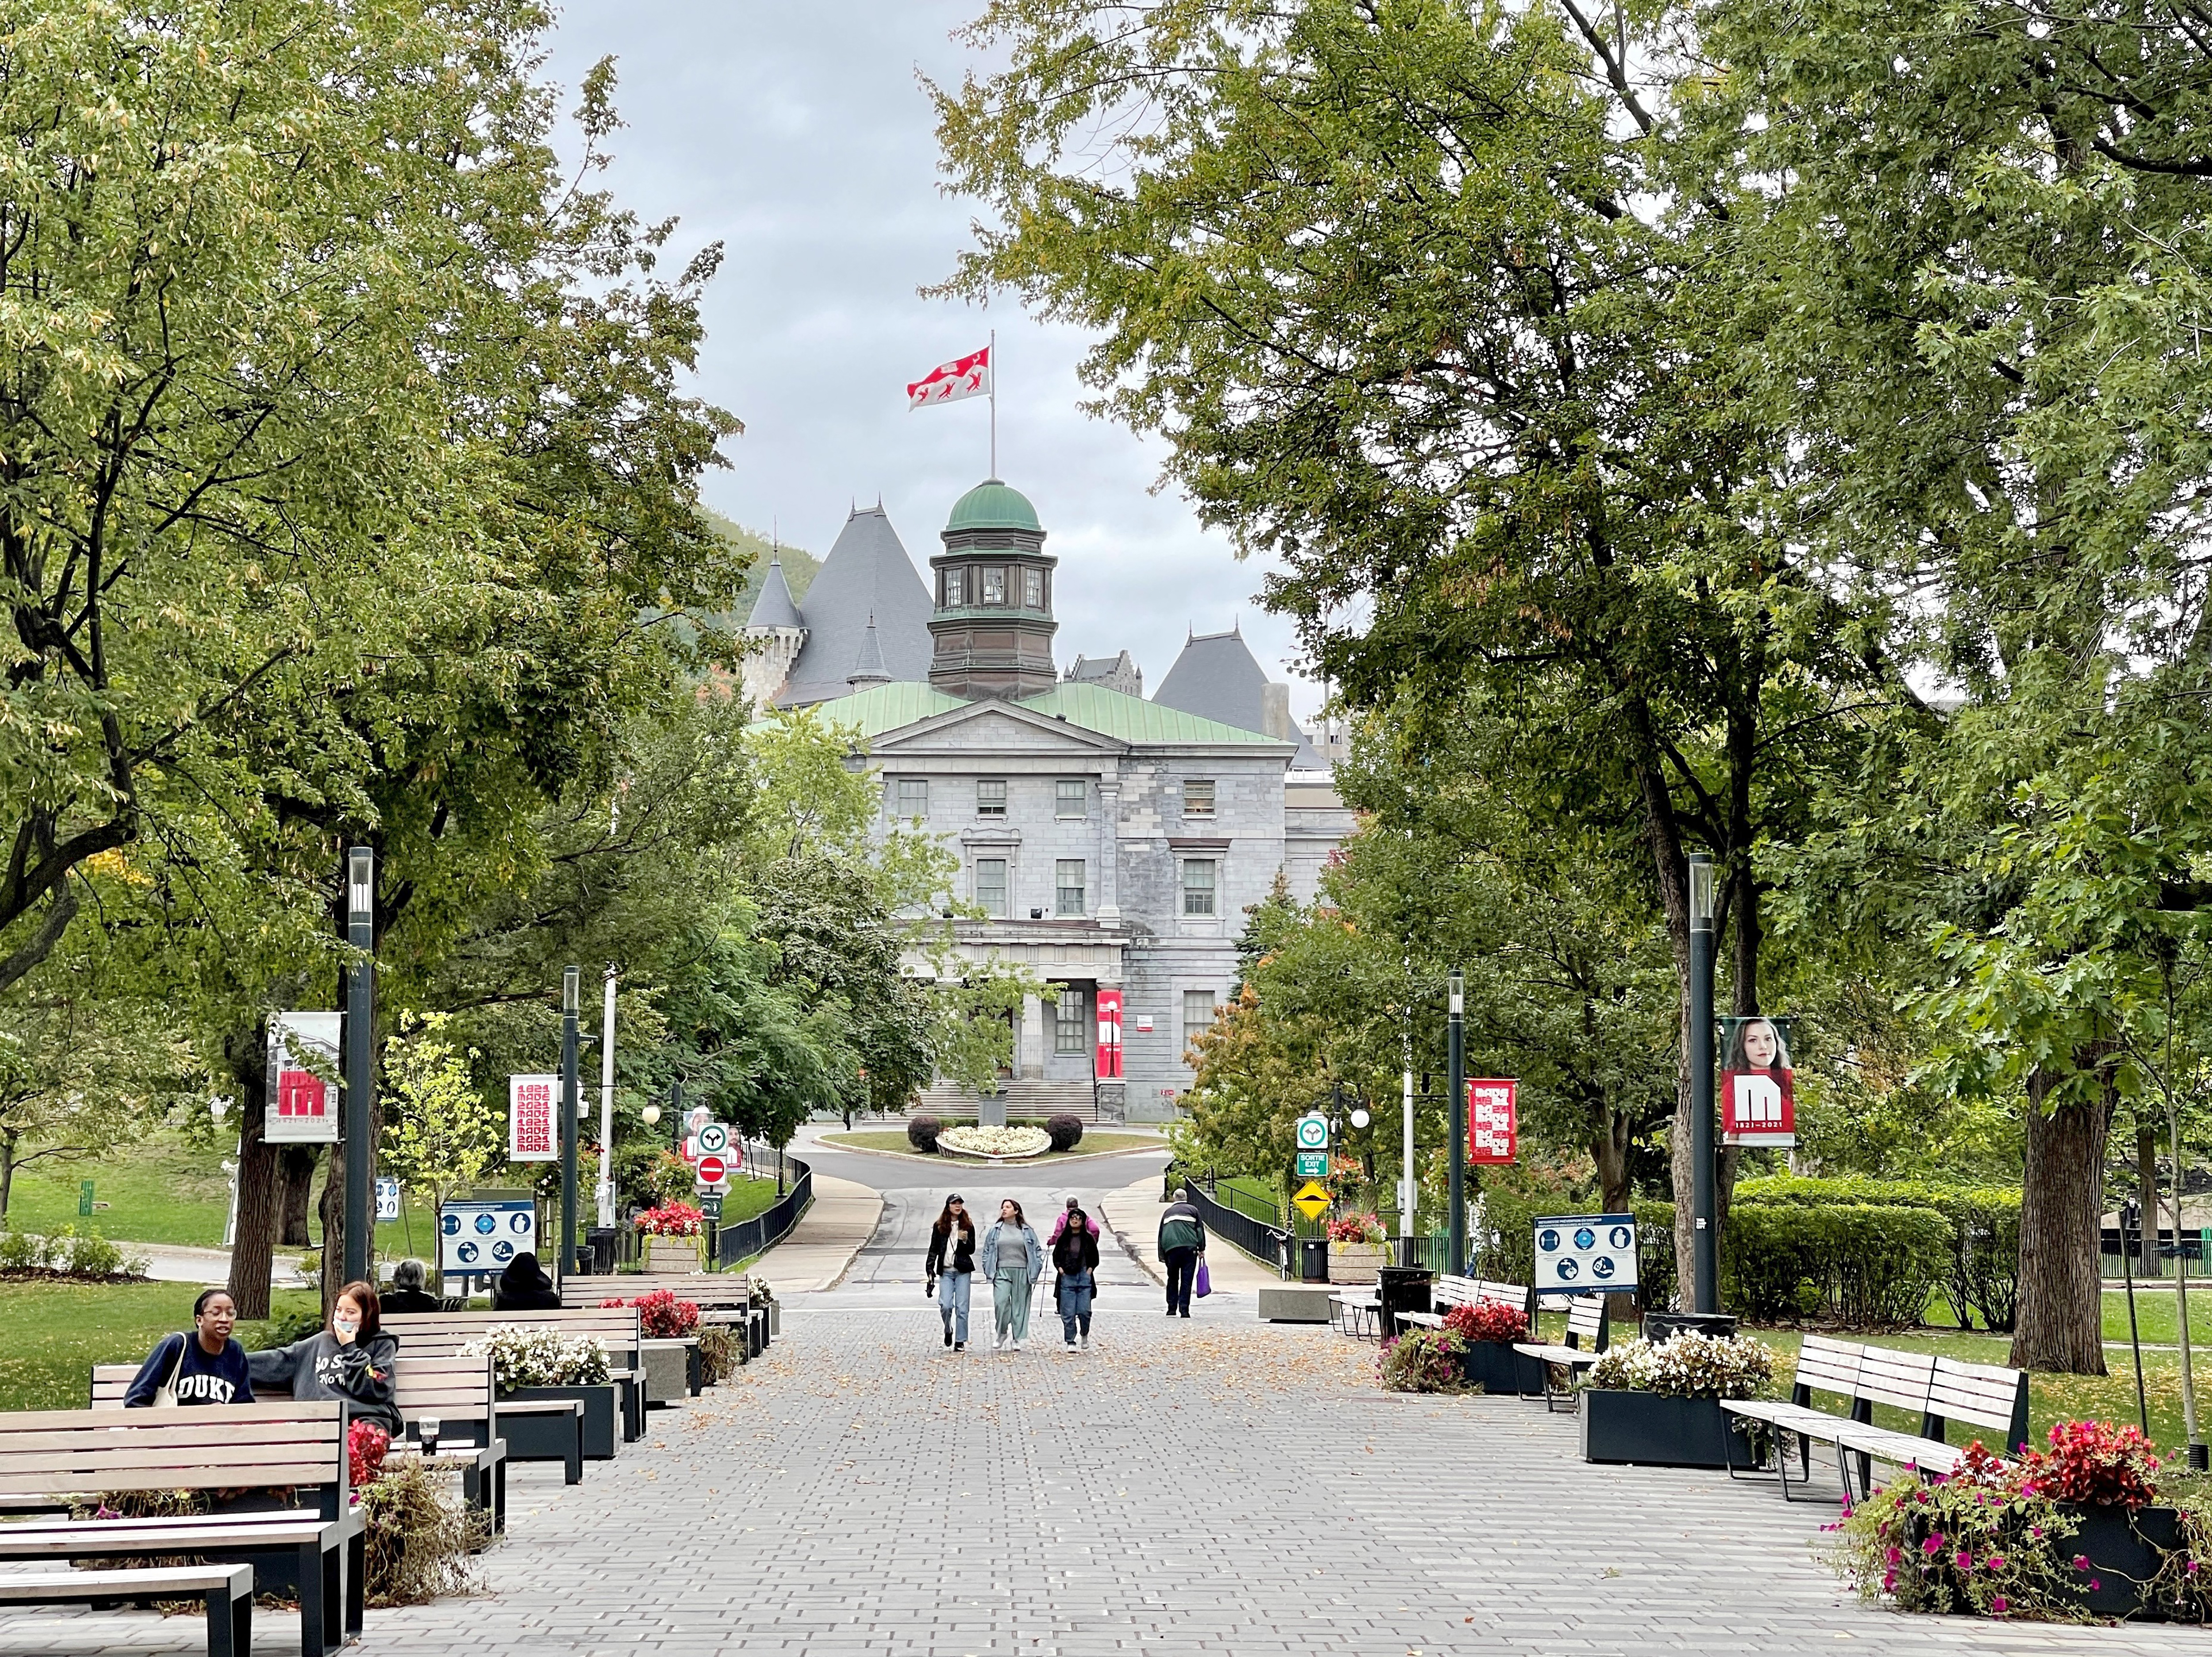 You can get into these Canadian universities without IELTS